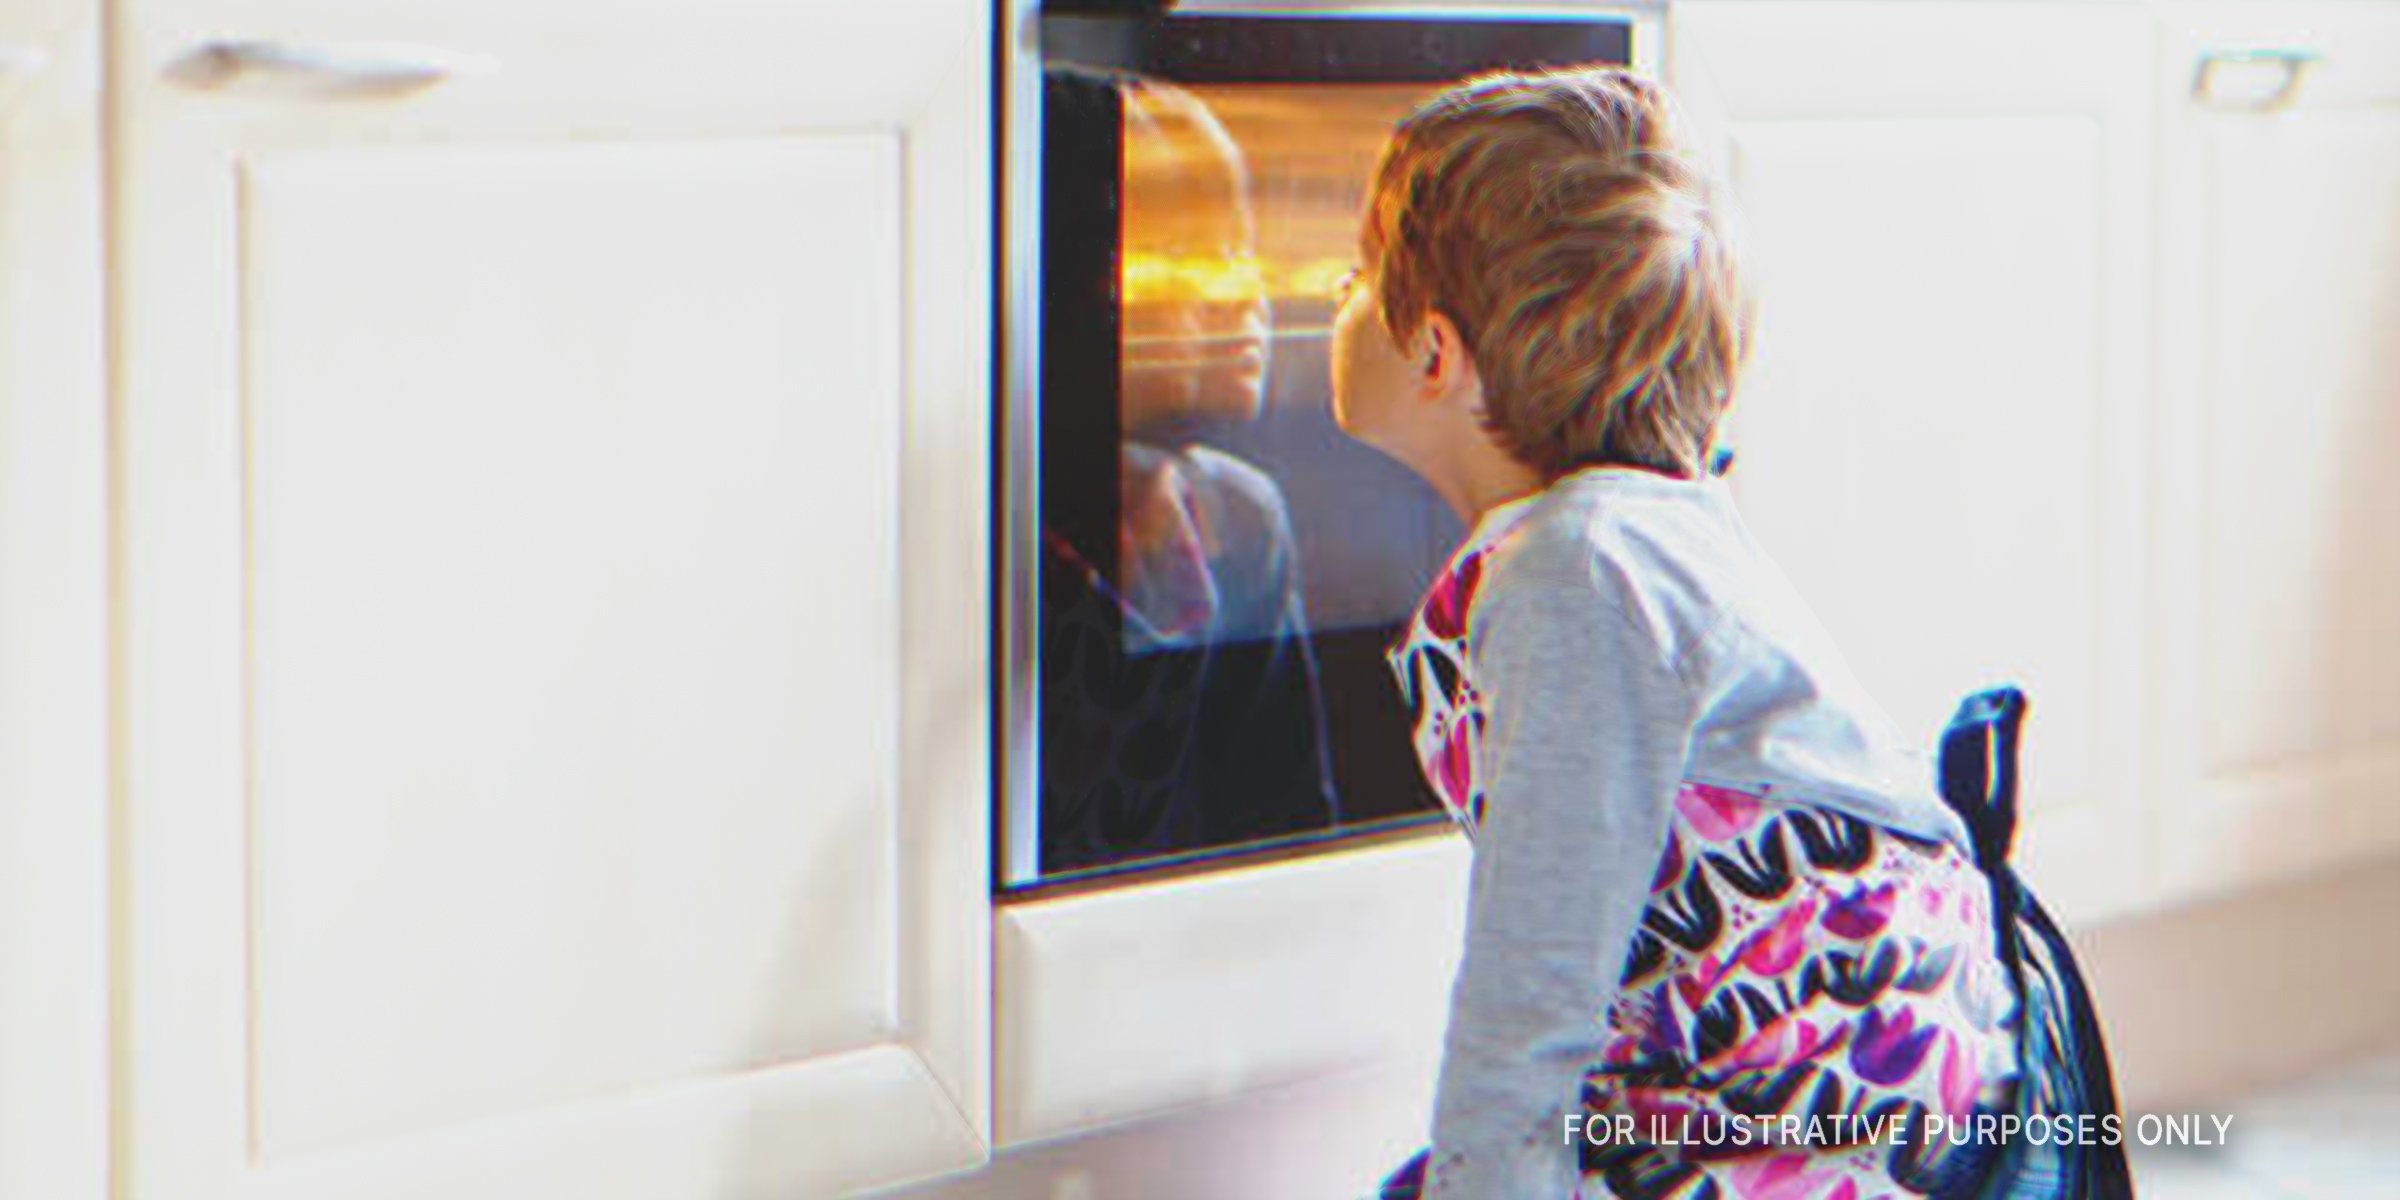 Boy looking at an oven | Source: Shutterstock